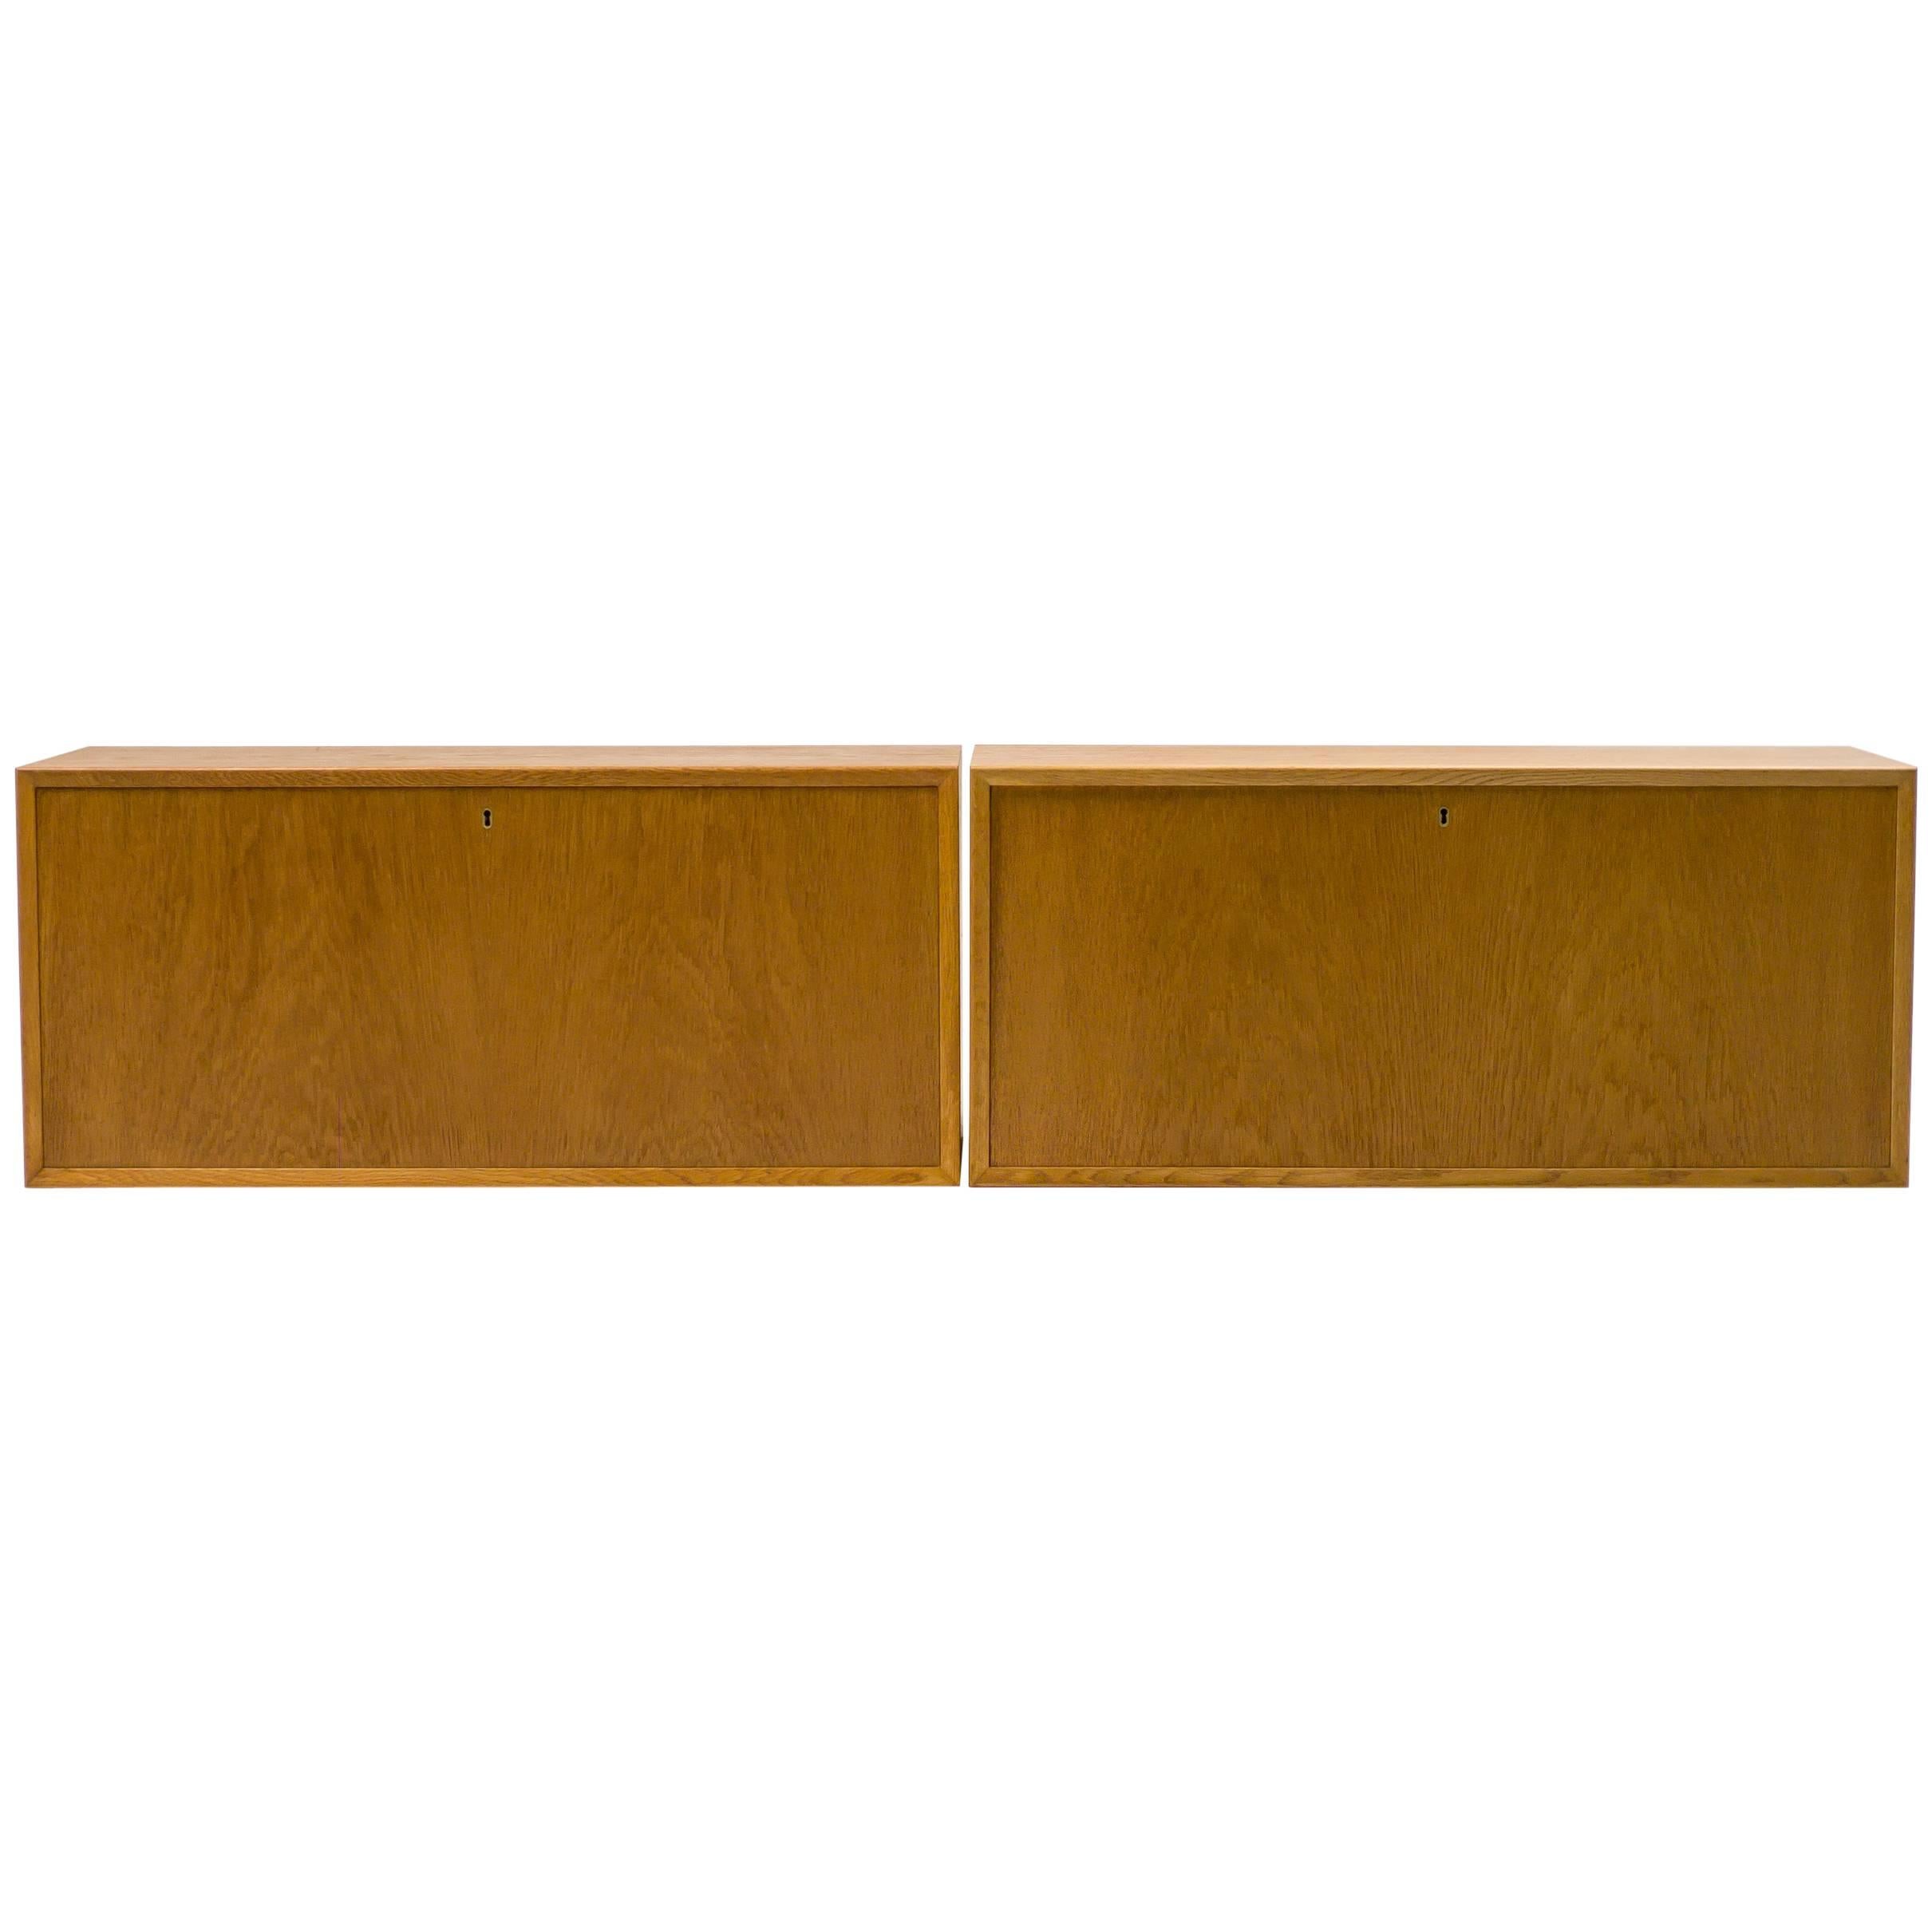 Pair of Architectural Danish Hanging Cabinets in Oak